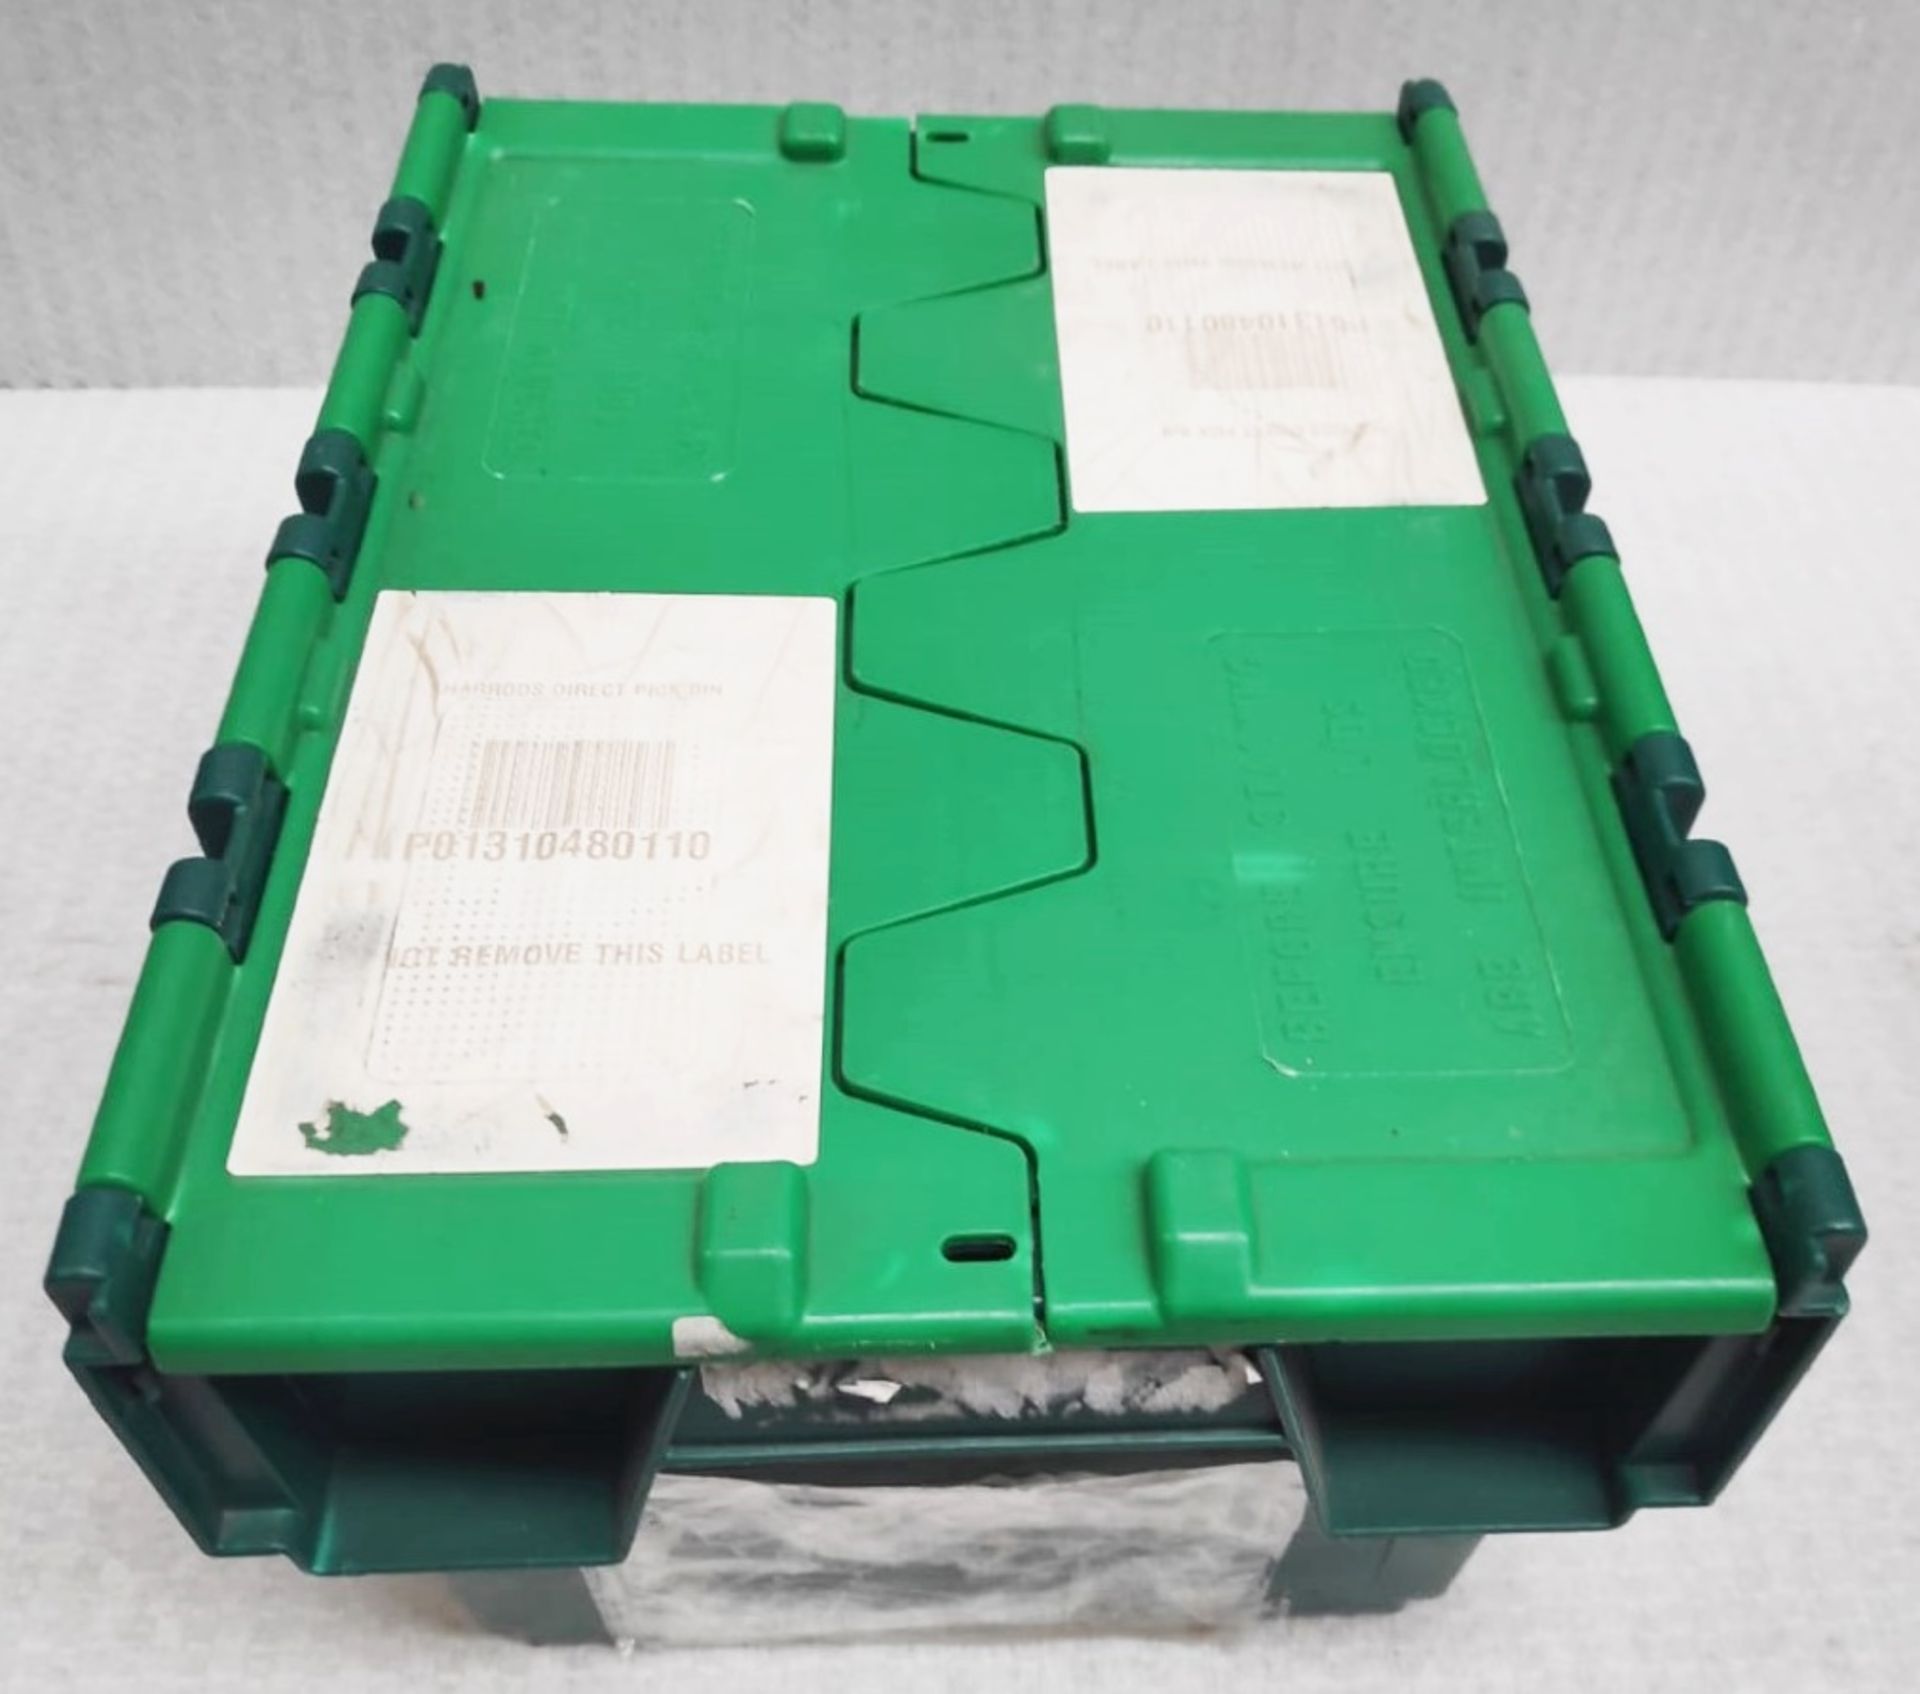 20 x Robust Compact Green Plastic Stackable Secure Storage Boxes With Attached Hinged Lids - - Image 2 of 6